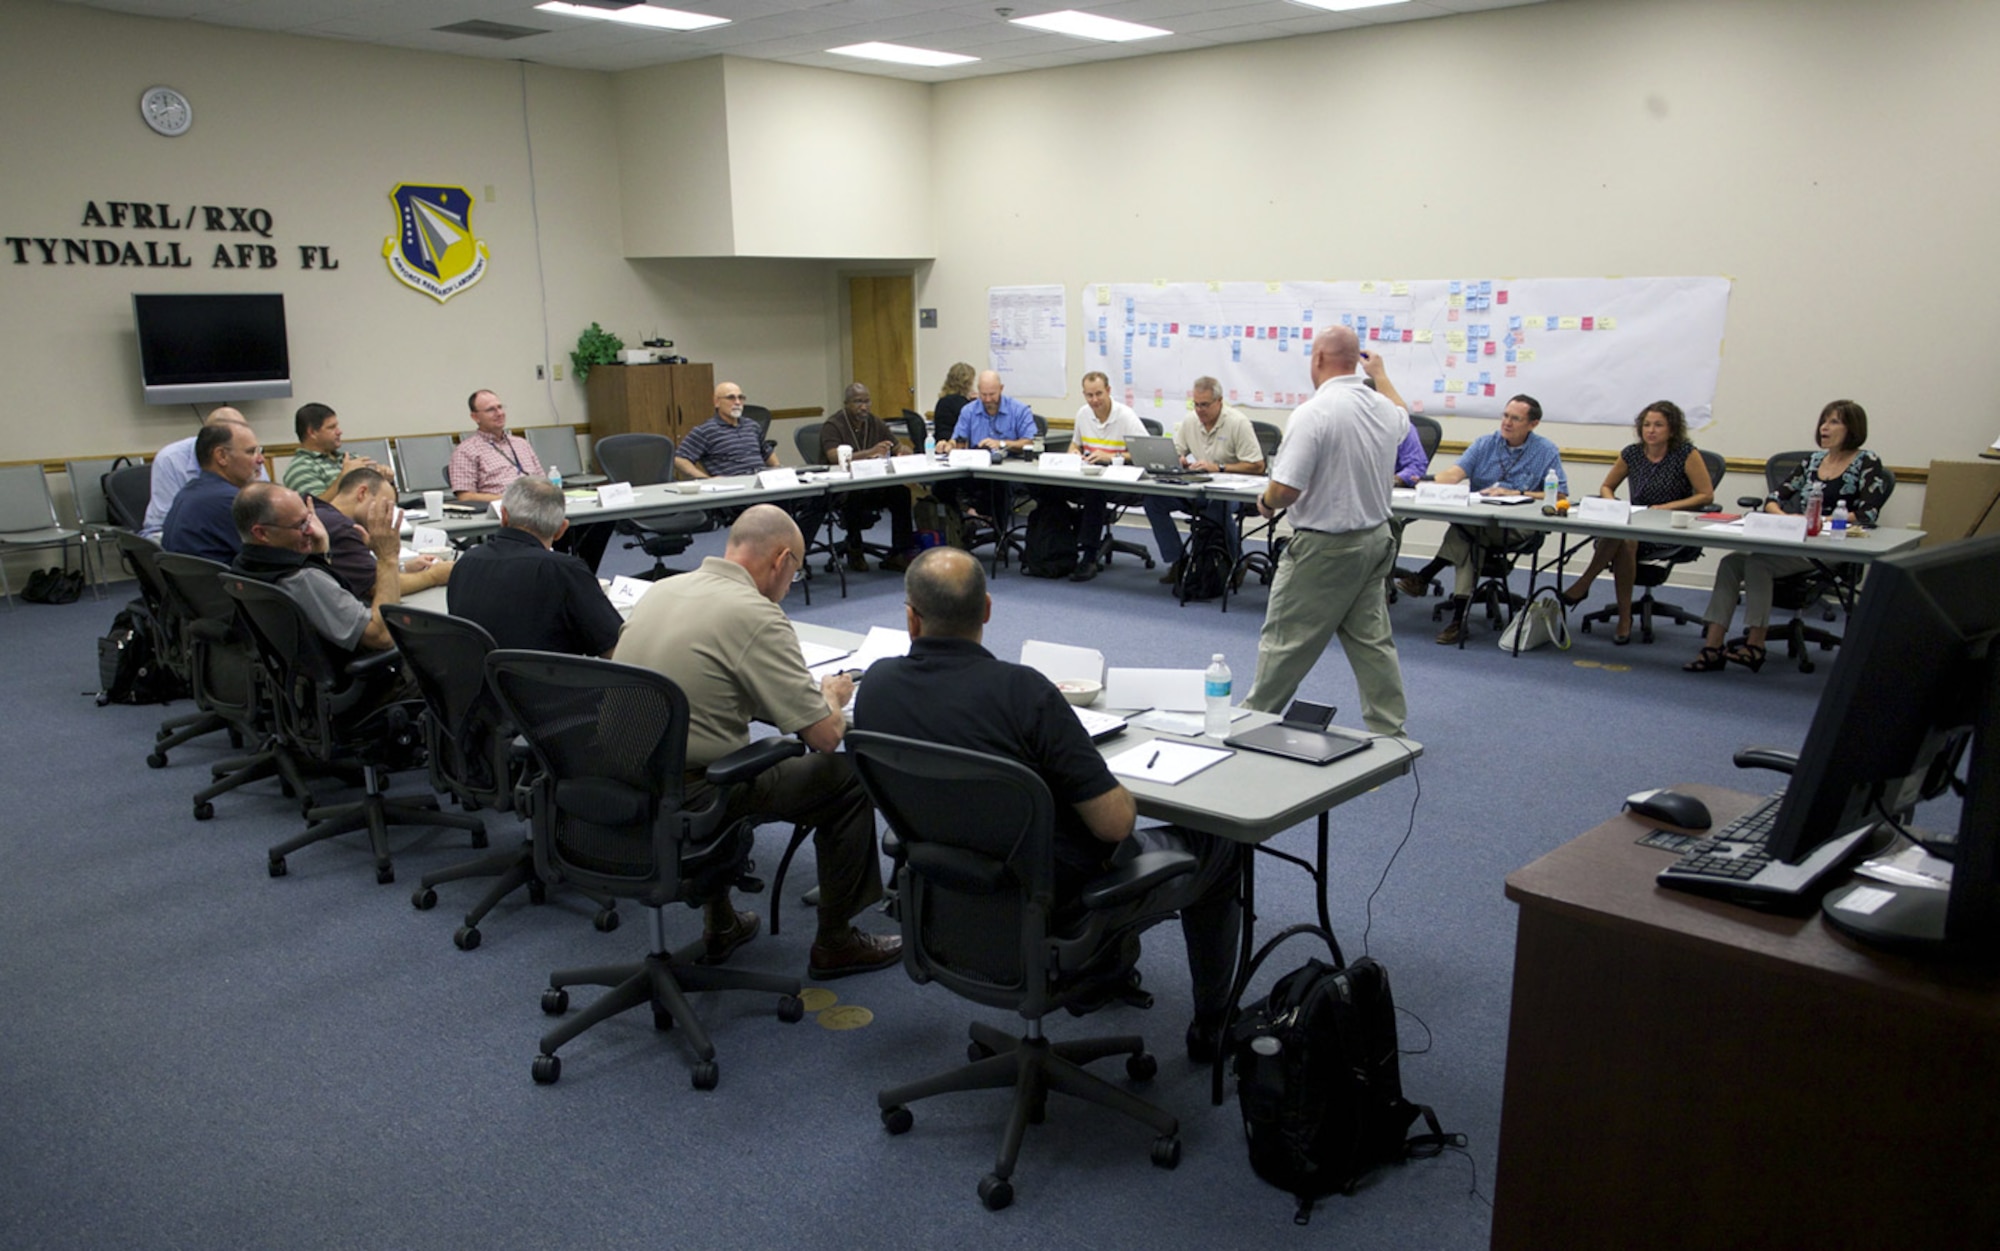 TYNDALL AIR FORCE BASE, Fla. – Members of the Air Force Civil Engineer Center's Det. 1 hosted a rapid improvement event here, Aug. 27-29, 2013, to define roles and responsibilities for AFCEC’s new research and acquisition division scheduled to launch Oct. 1. Participants included Air Combat Command, members of the Secretary of the Air Force’s office for acquisition and office for installations and energy, as well as other AFCEC directorates. The R&A division will develop and implement new technology and systems for the Air Force Civil Engineer. (U.S. Air Force photo/Eddie Green)